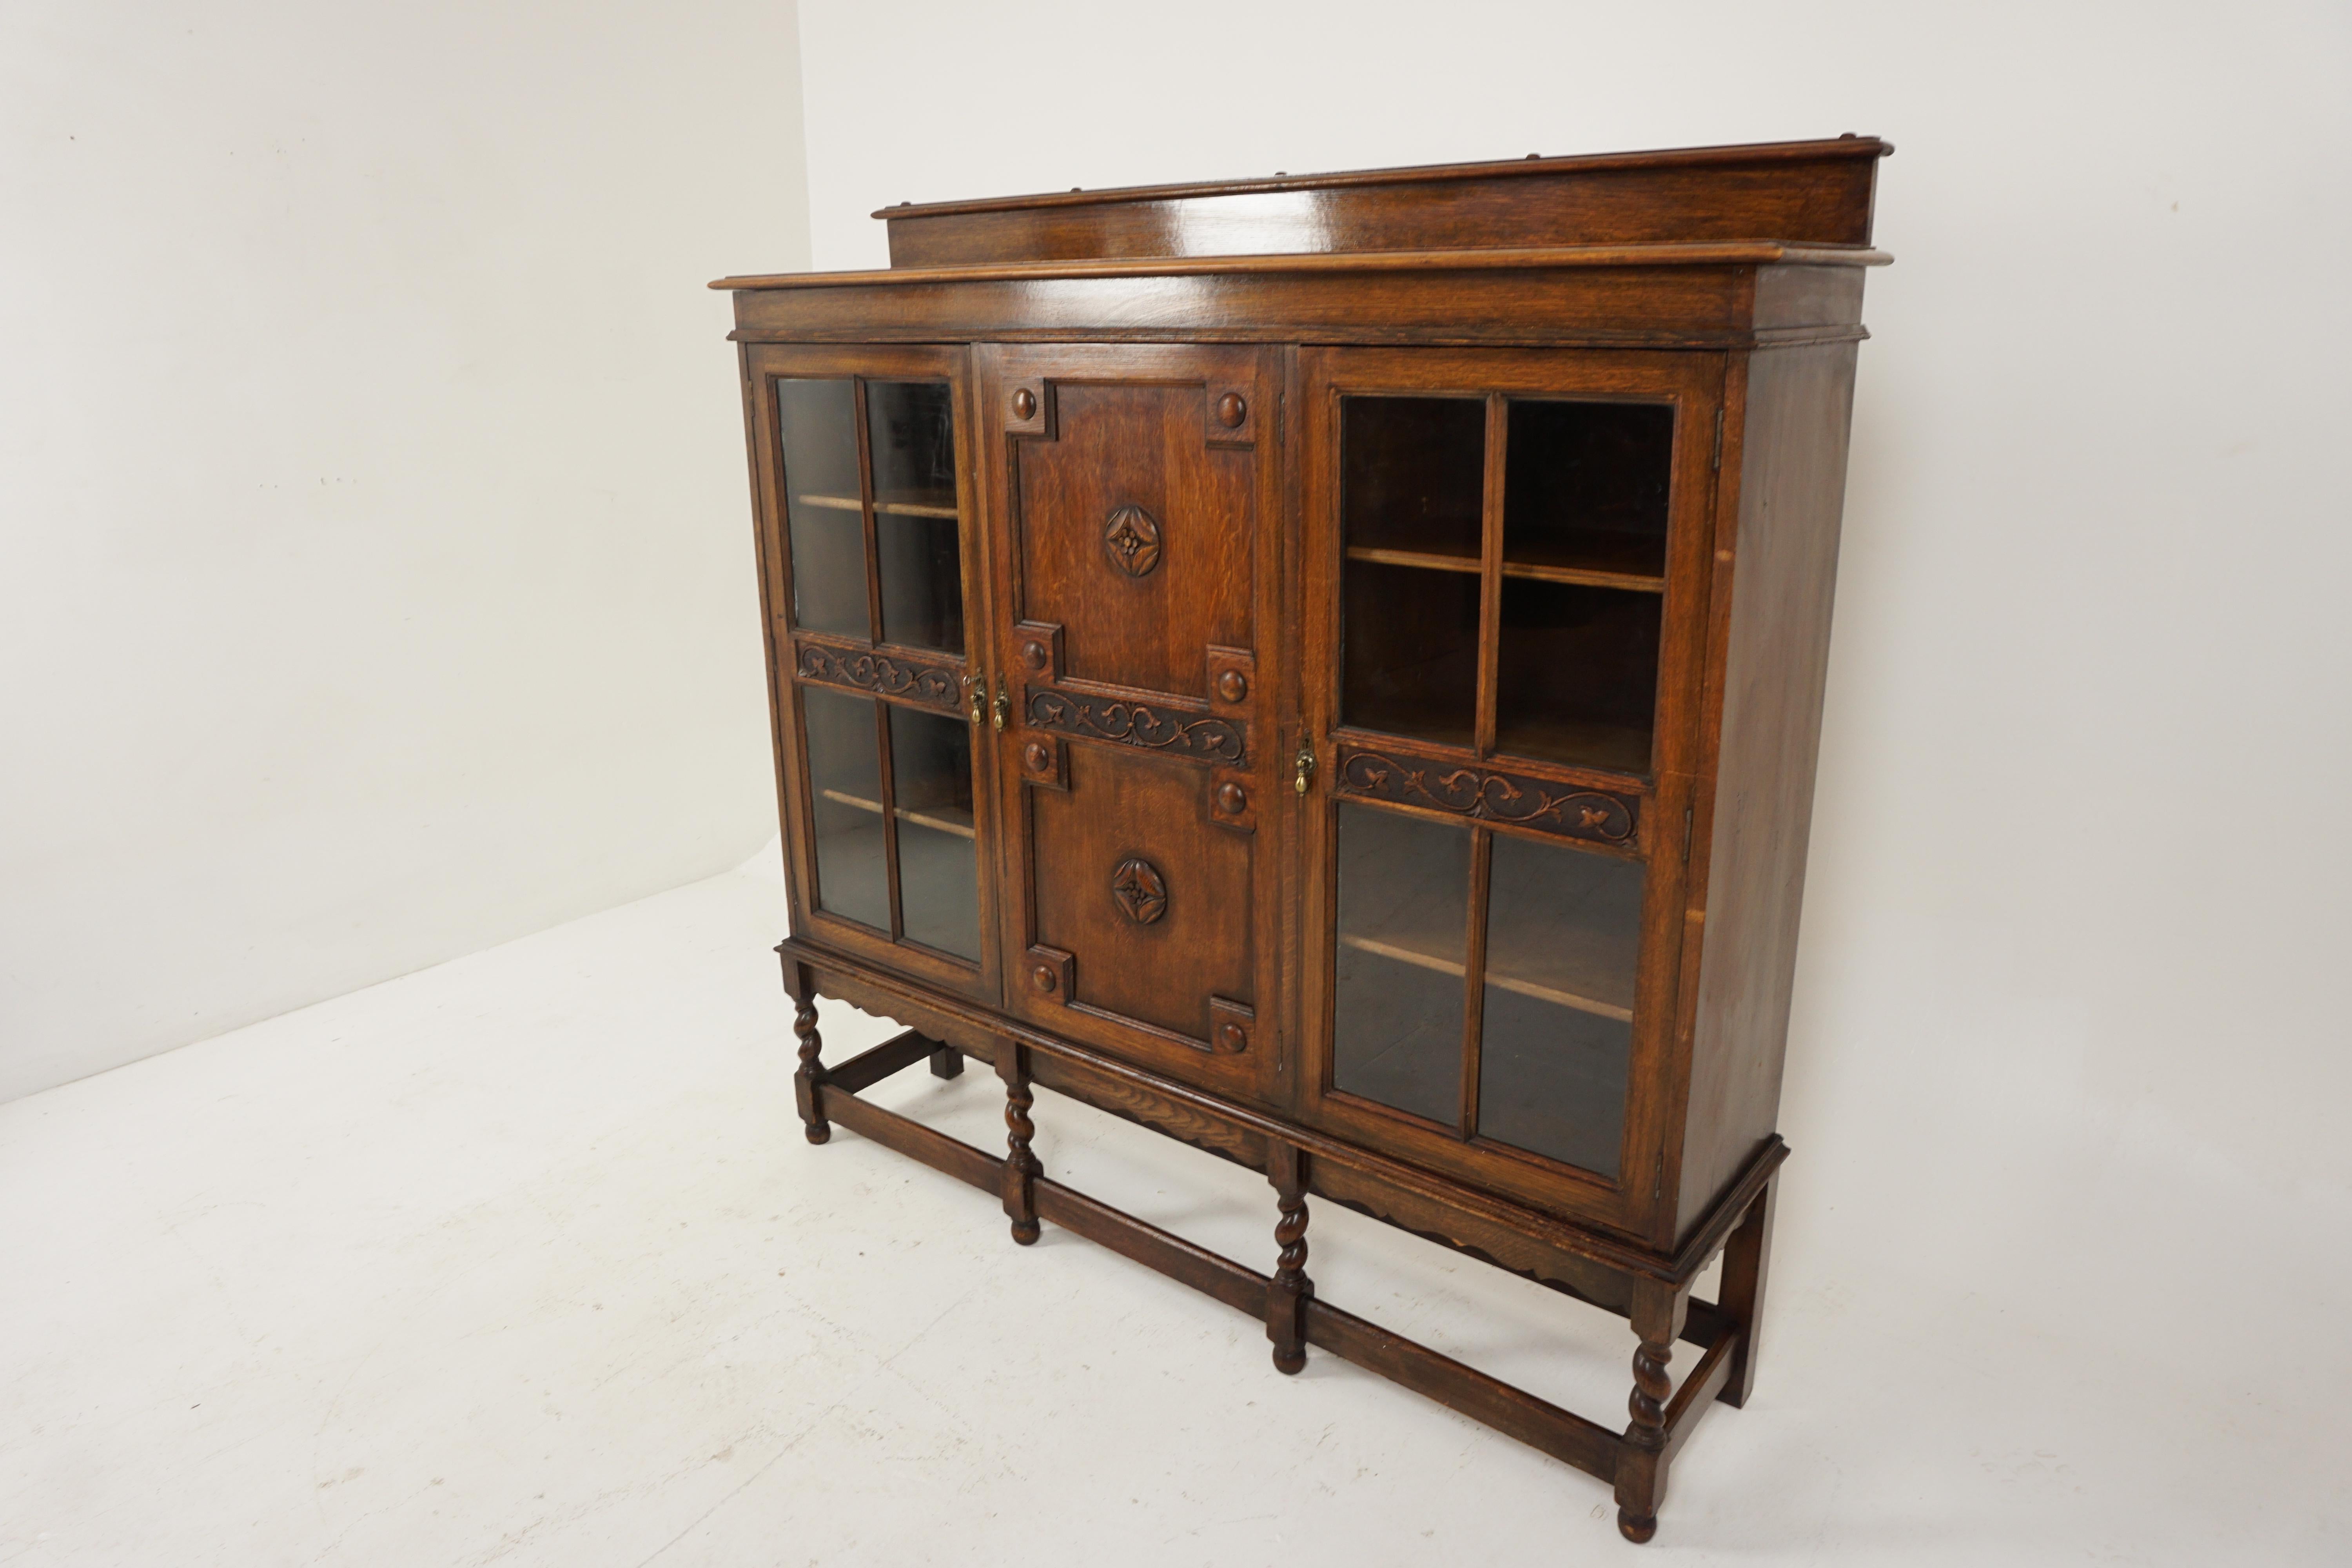 Antique 3 Door Barley Twist Oak Bookcase display cabinet, Scotland 1920, B2665 

Scotland 1920
Solid Oak
Original Finish
Has a rectangular top with pediment 
Under you have a single paneled door with rondels to the front
Flanked by a pair of